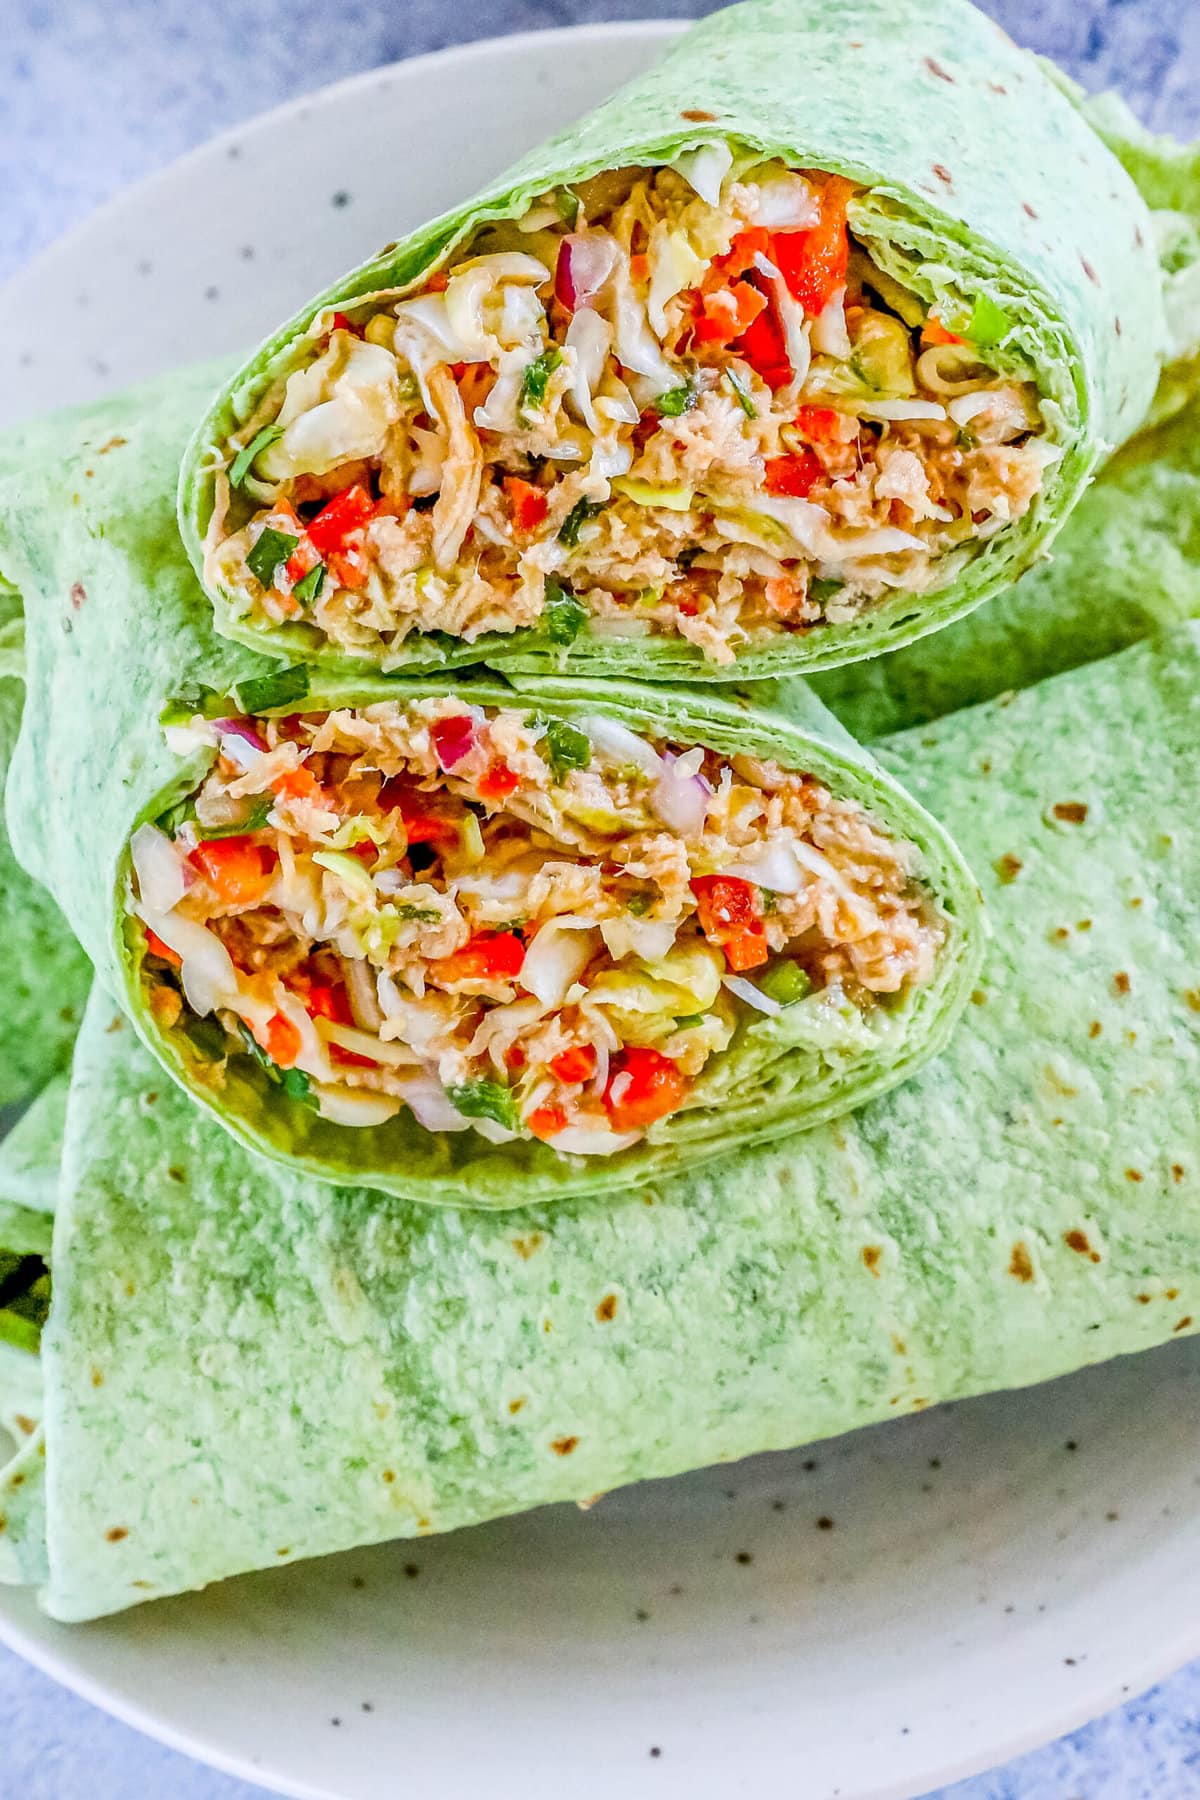 chicken salad with shredded chicken, cabbage, and diced vegetables wrapped in a green tortilla sliced in half on a white plate